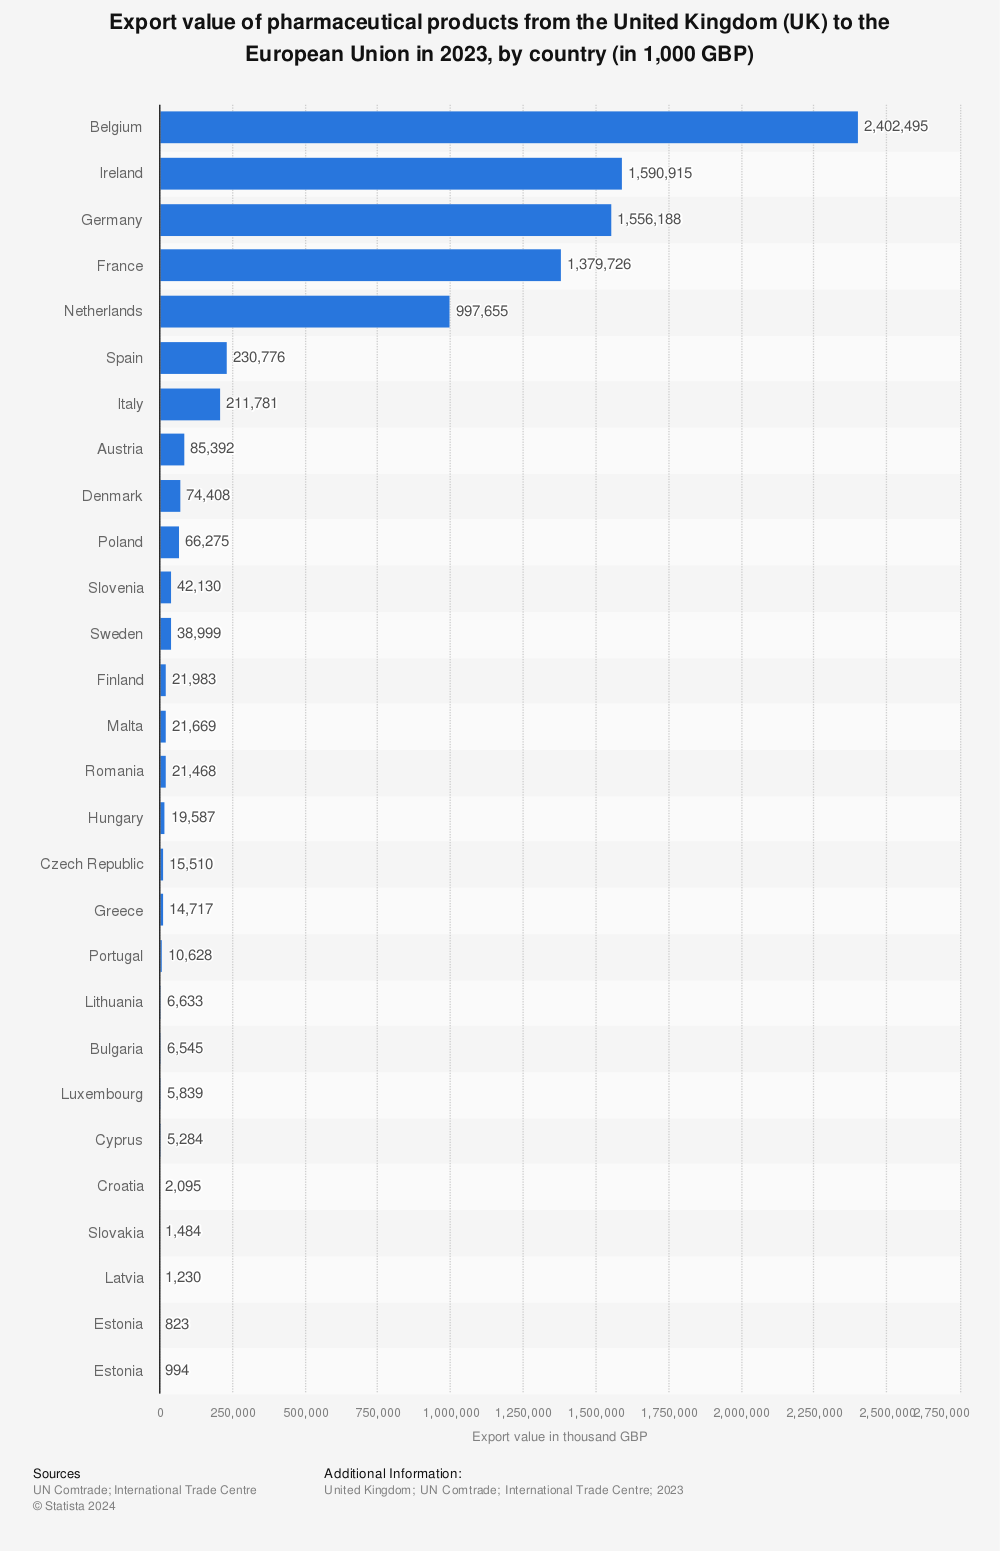 Statistic: Export value of pharmaceutical products from the United Kingdom (UK) to the European Union in 2022, by country (in 1,000 GBP) | Statista